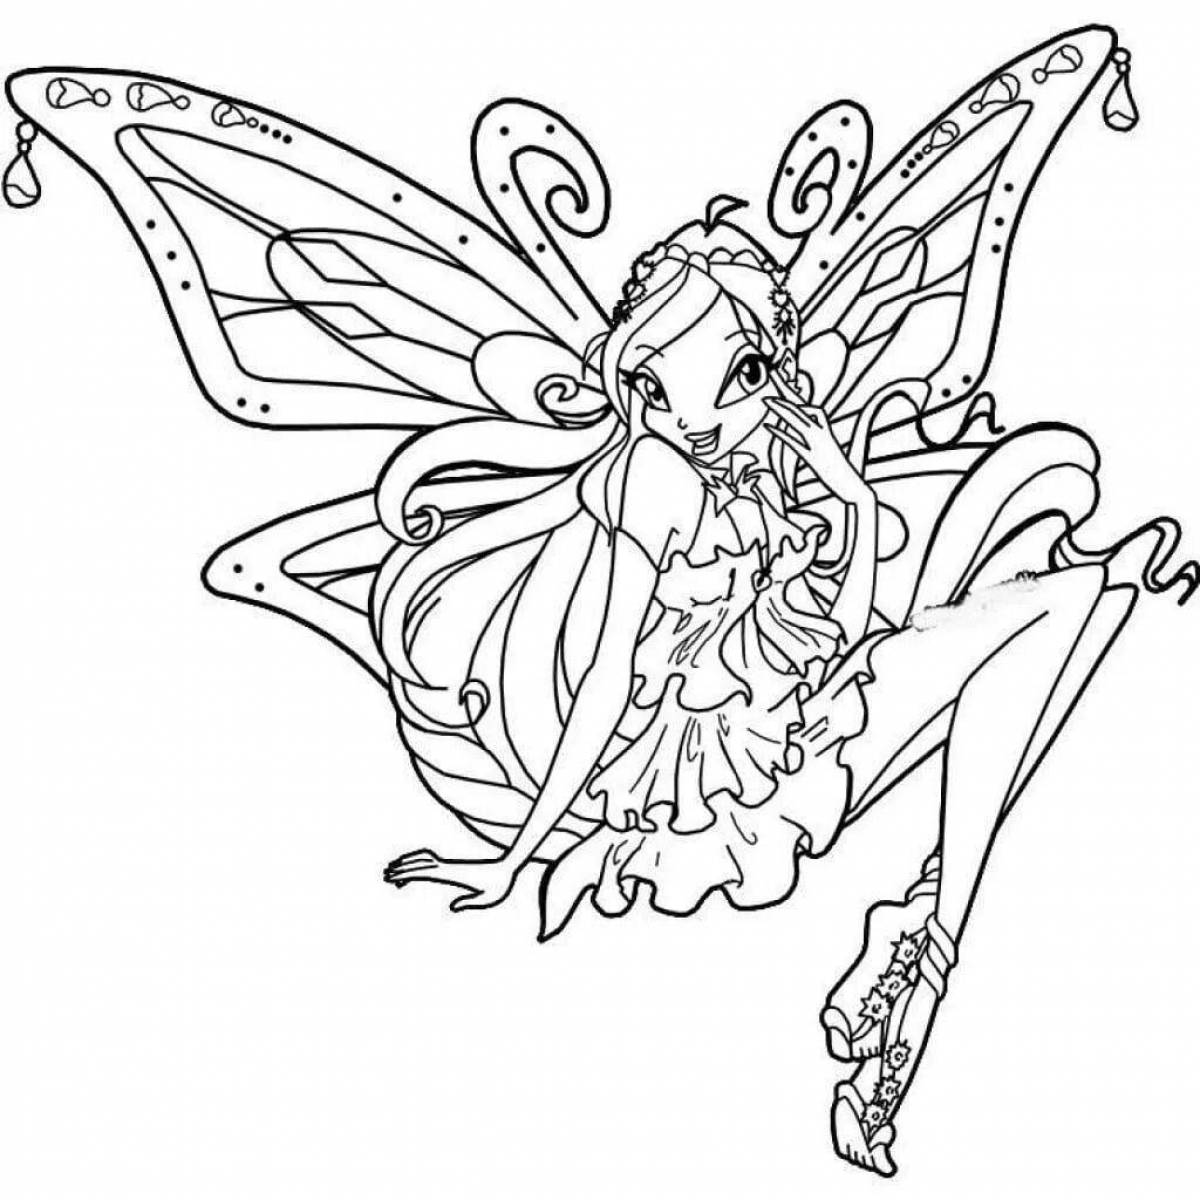 Adorable winx fairy coloring book for kids